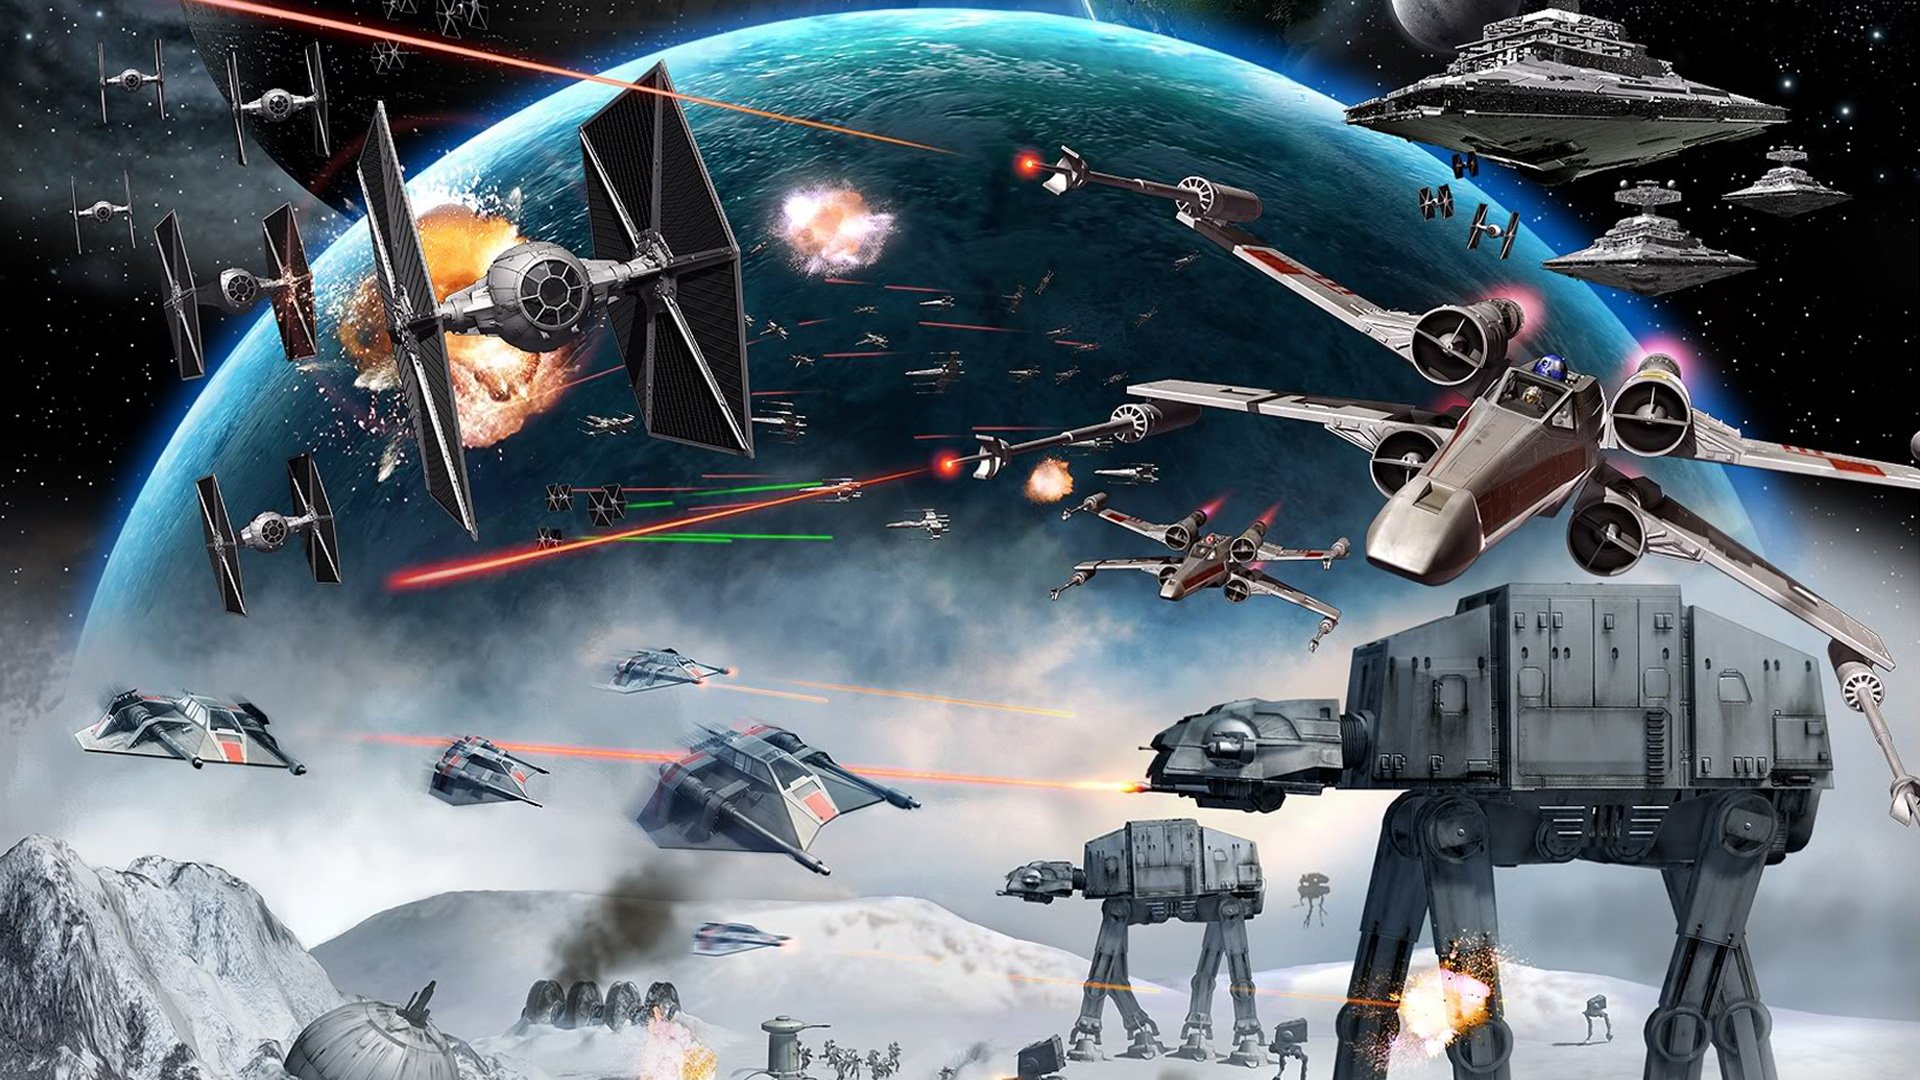 star wars animated wallpaper download